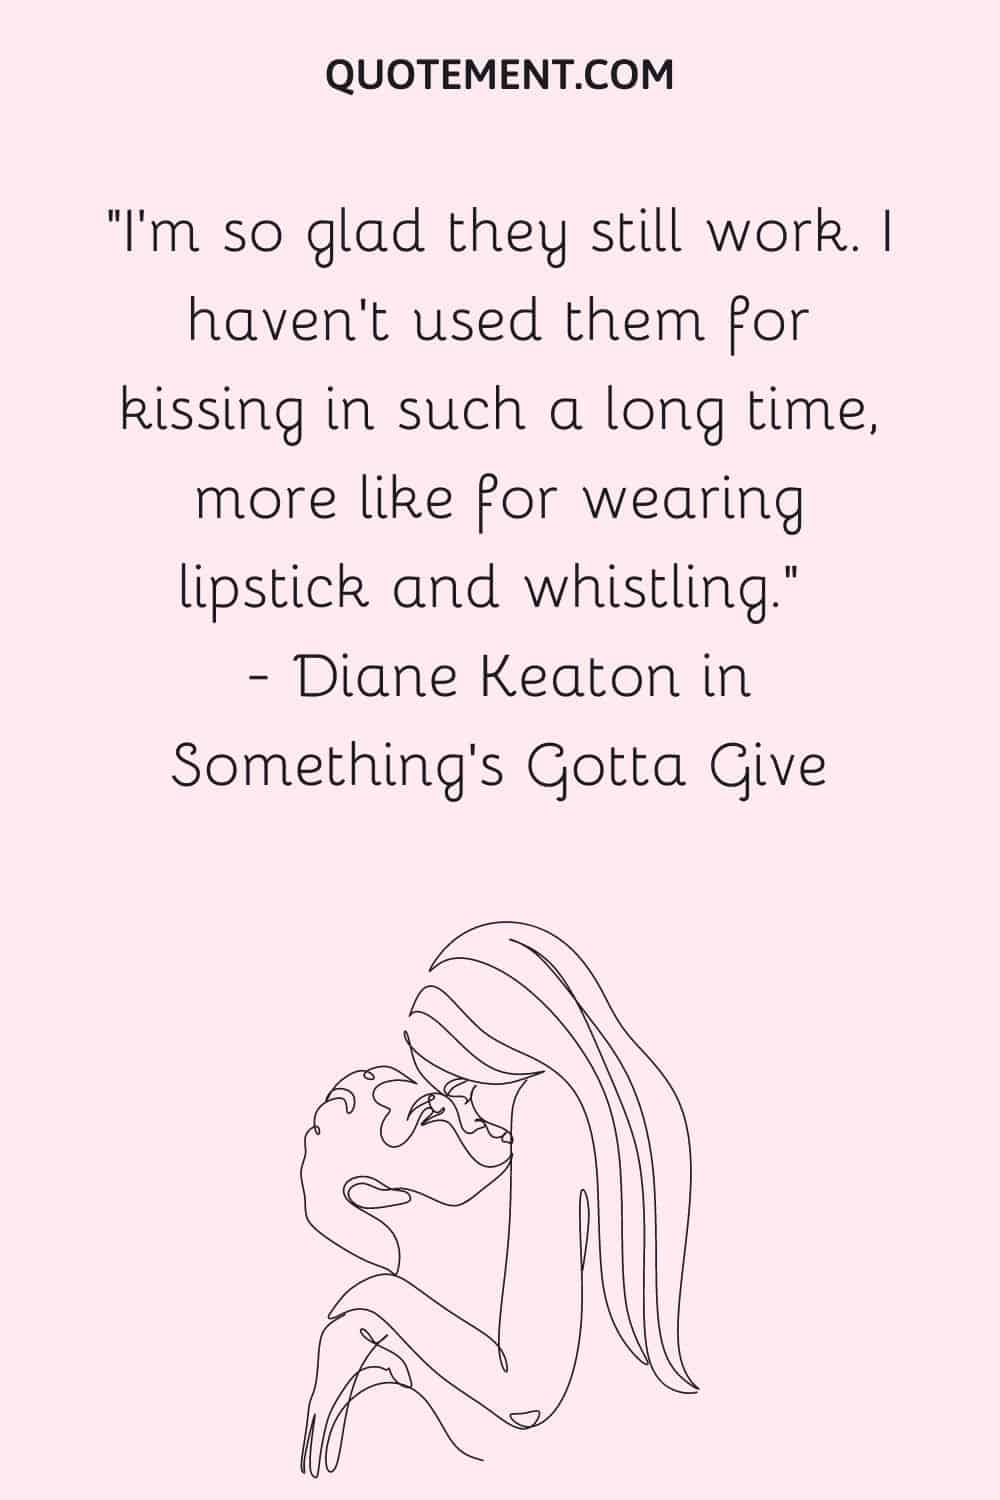 I'm so glad they still work. I haven't used them for kissing in such a long time, more like for wearing lipstick and whistling. — Diane Keaton in Something's Gotta Give